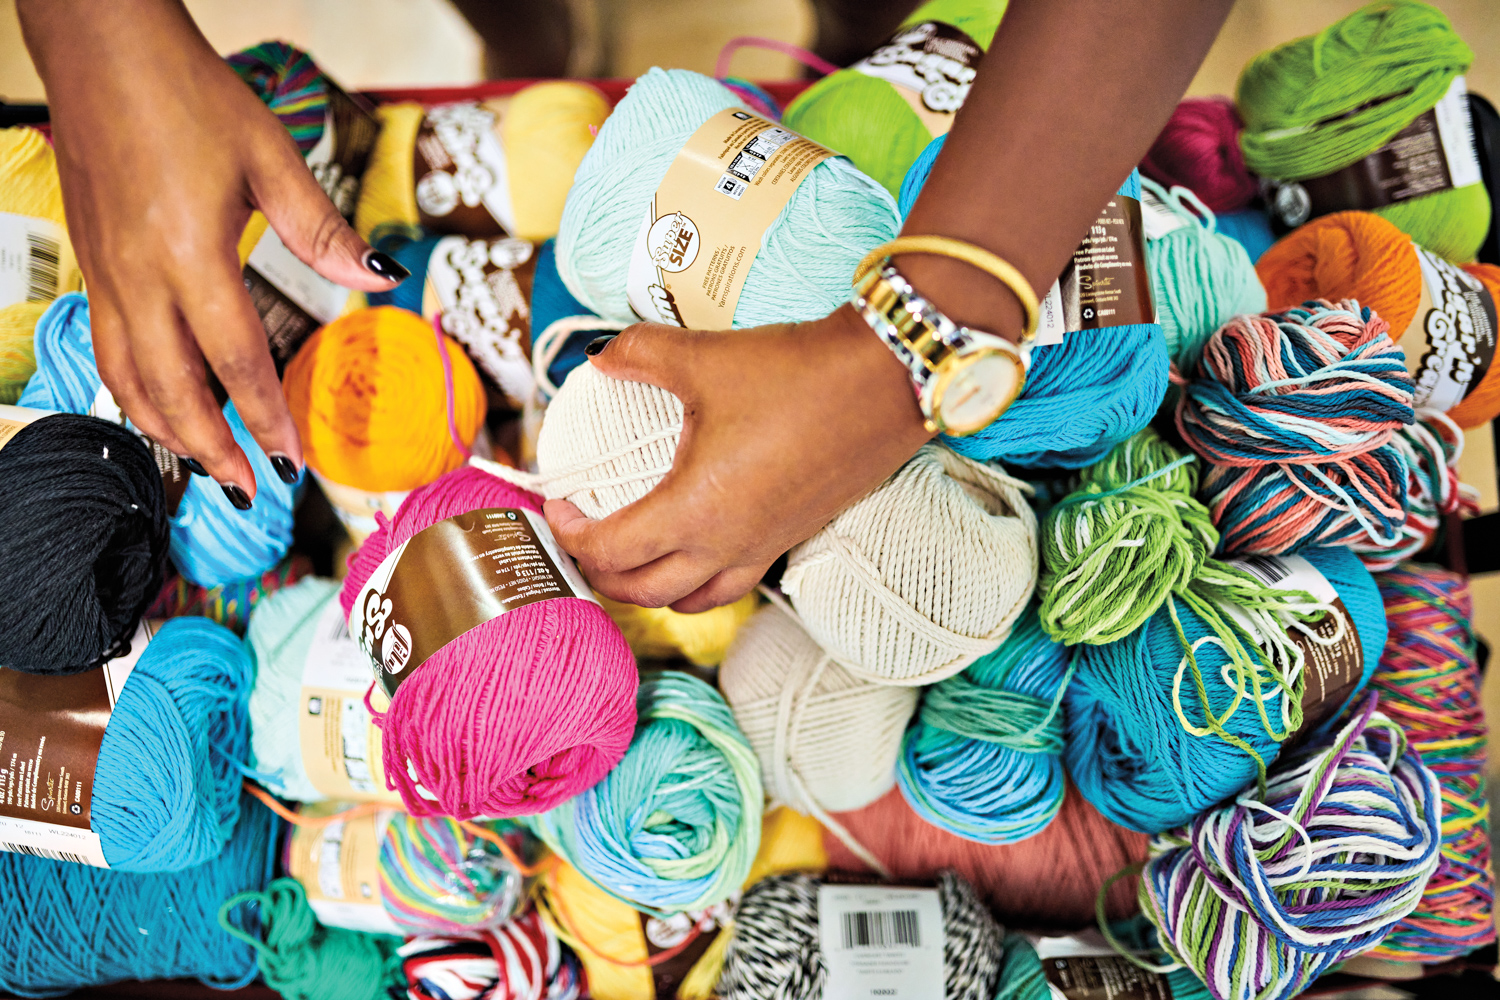 artist michelle drummond sorting through a collection of colorful yarn